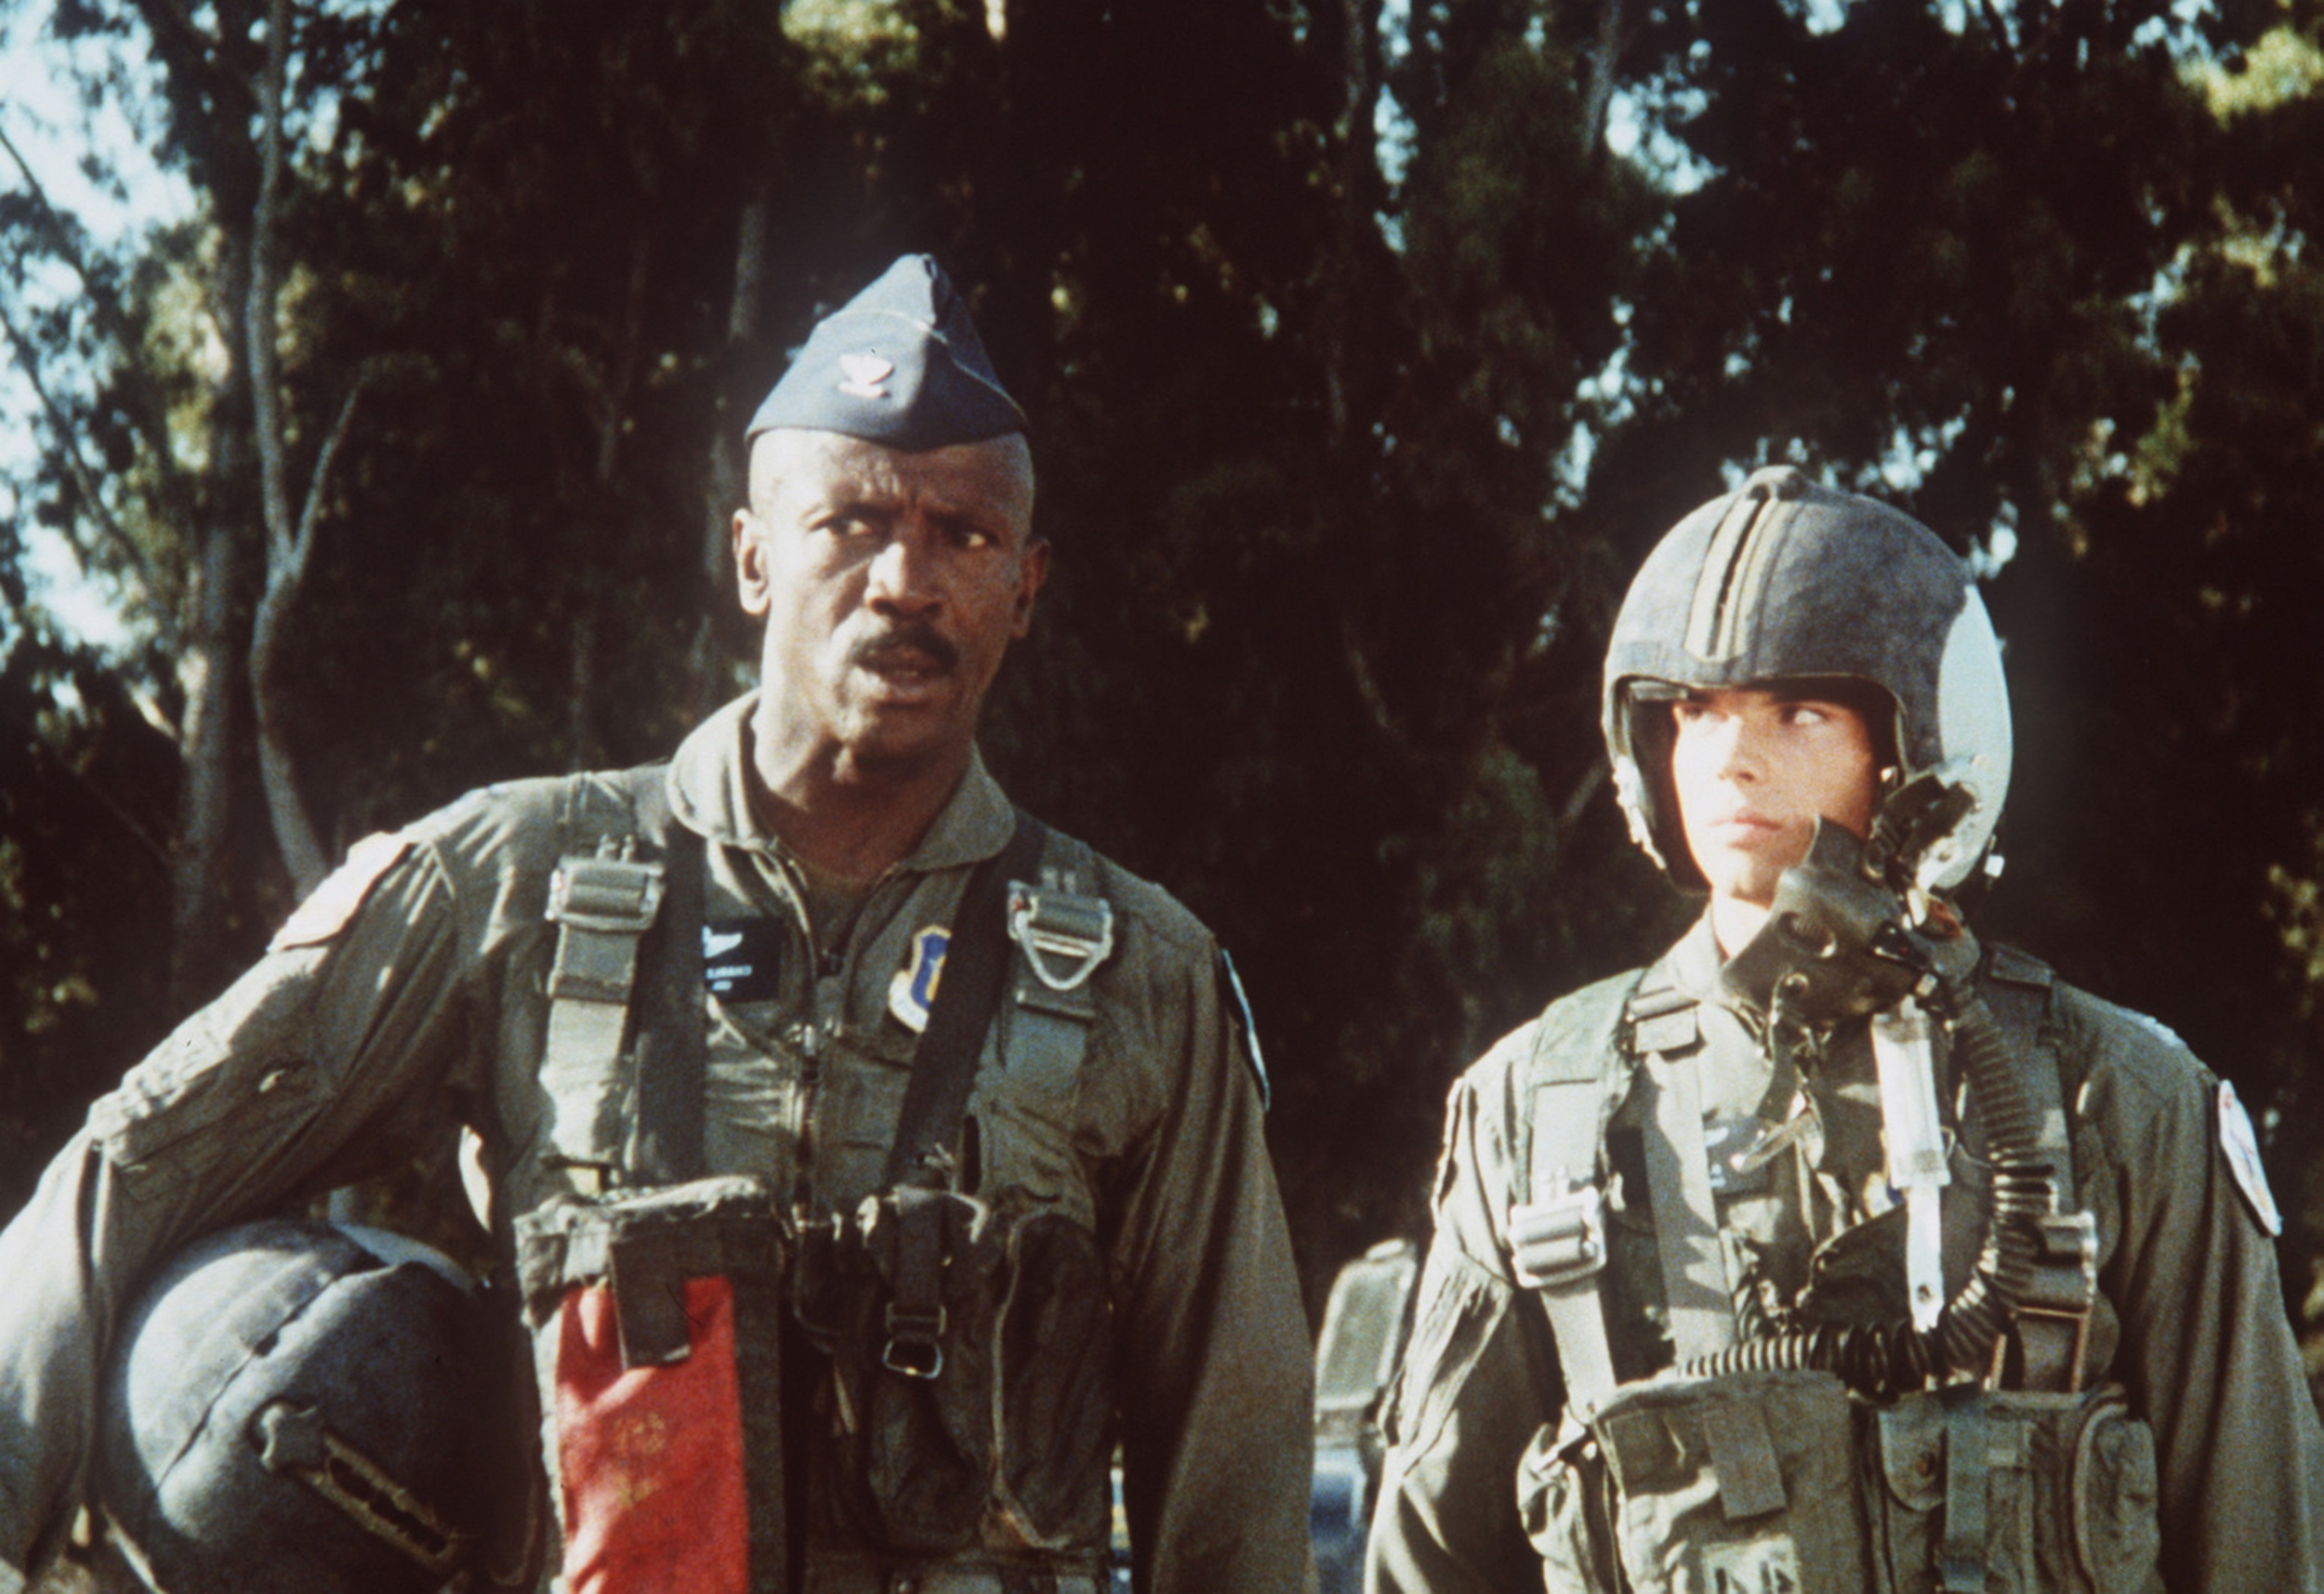 <p>“Iron Eagle” lives in the shadow of “Top Gun.” They came out the same year, but “Top Gun” was a huge hit, and “Iron Eagle” suffered in comparison. It has a very similar plot, but not the same stardom. However, “Iron Eagle” has three sequels. “Top Gun” is only now getting its first one.</p><p>You may also like: <a href='https://www.yardbarker.com/entertainment/articles/27_of_the_best_tv_theme_songs_of_the_21st_century_122323/s1__38935733'>27 of the best TV theme songs of the 21st century</a></p>